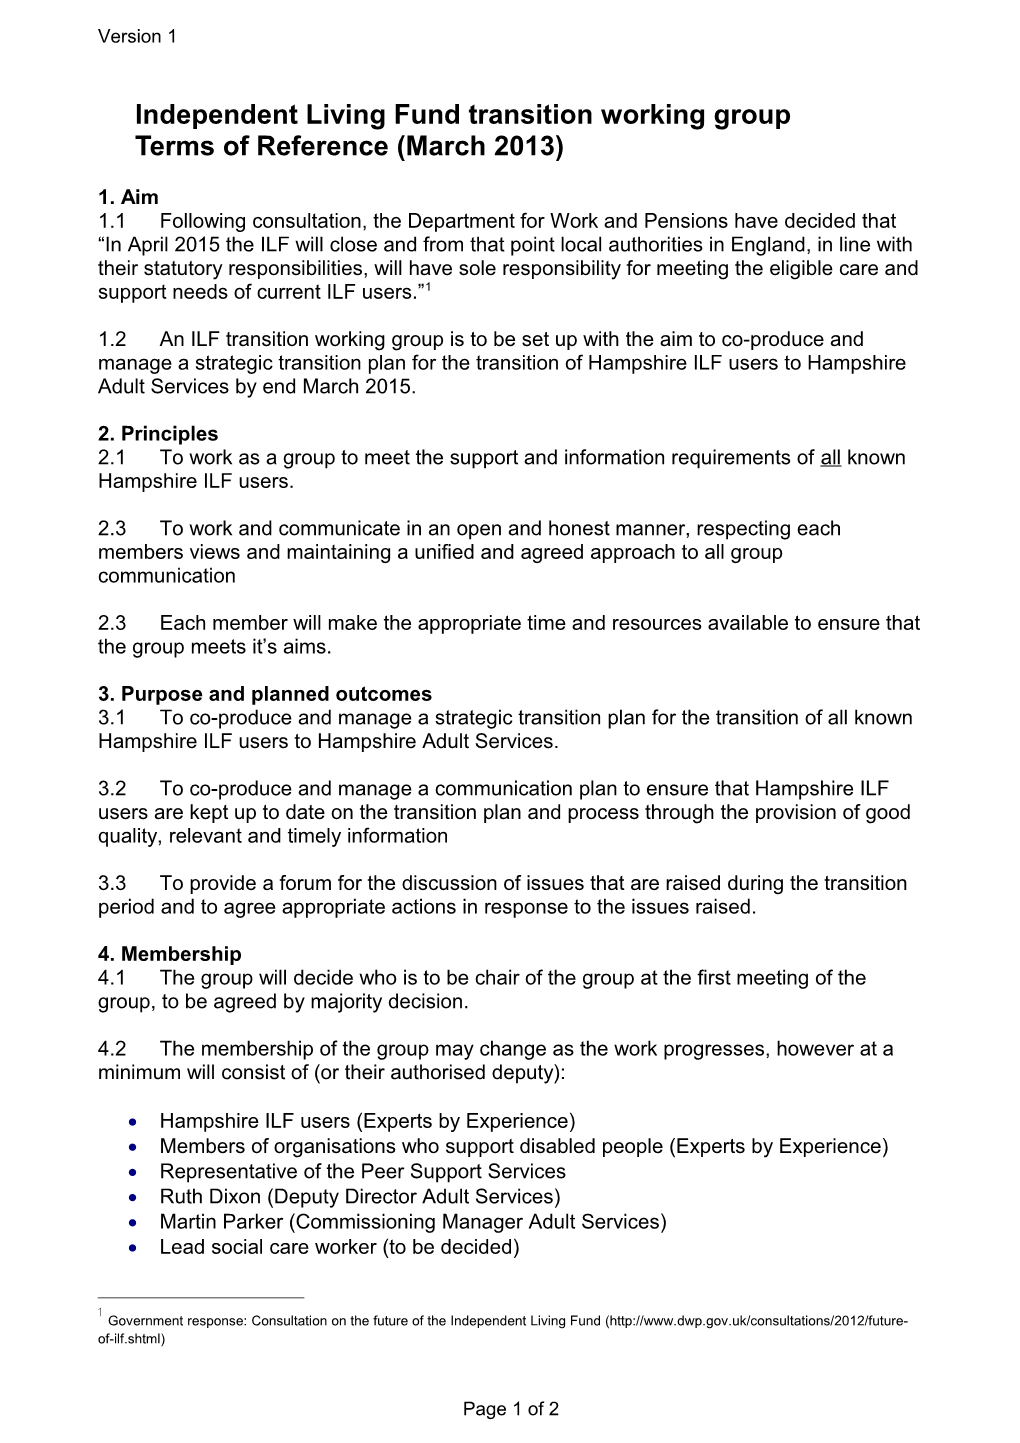 Briefing Document on the Independent Living Fund